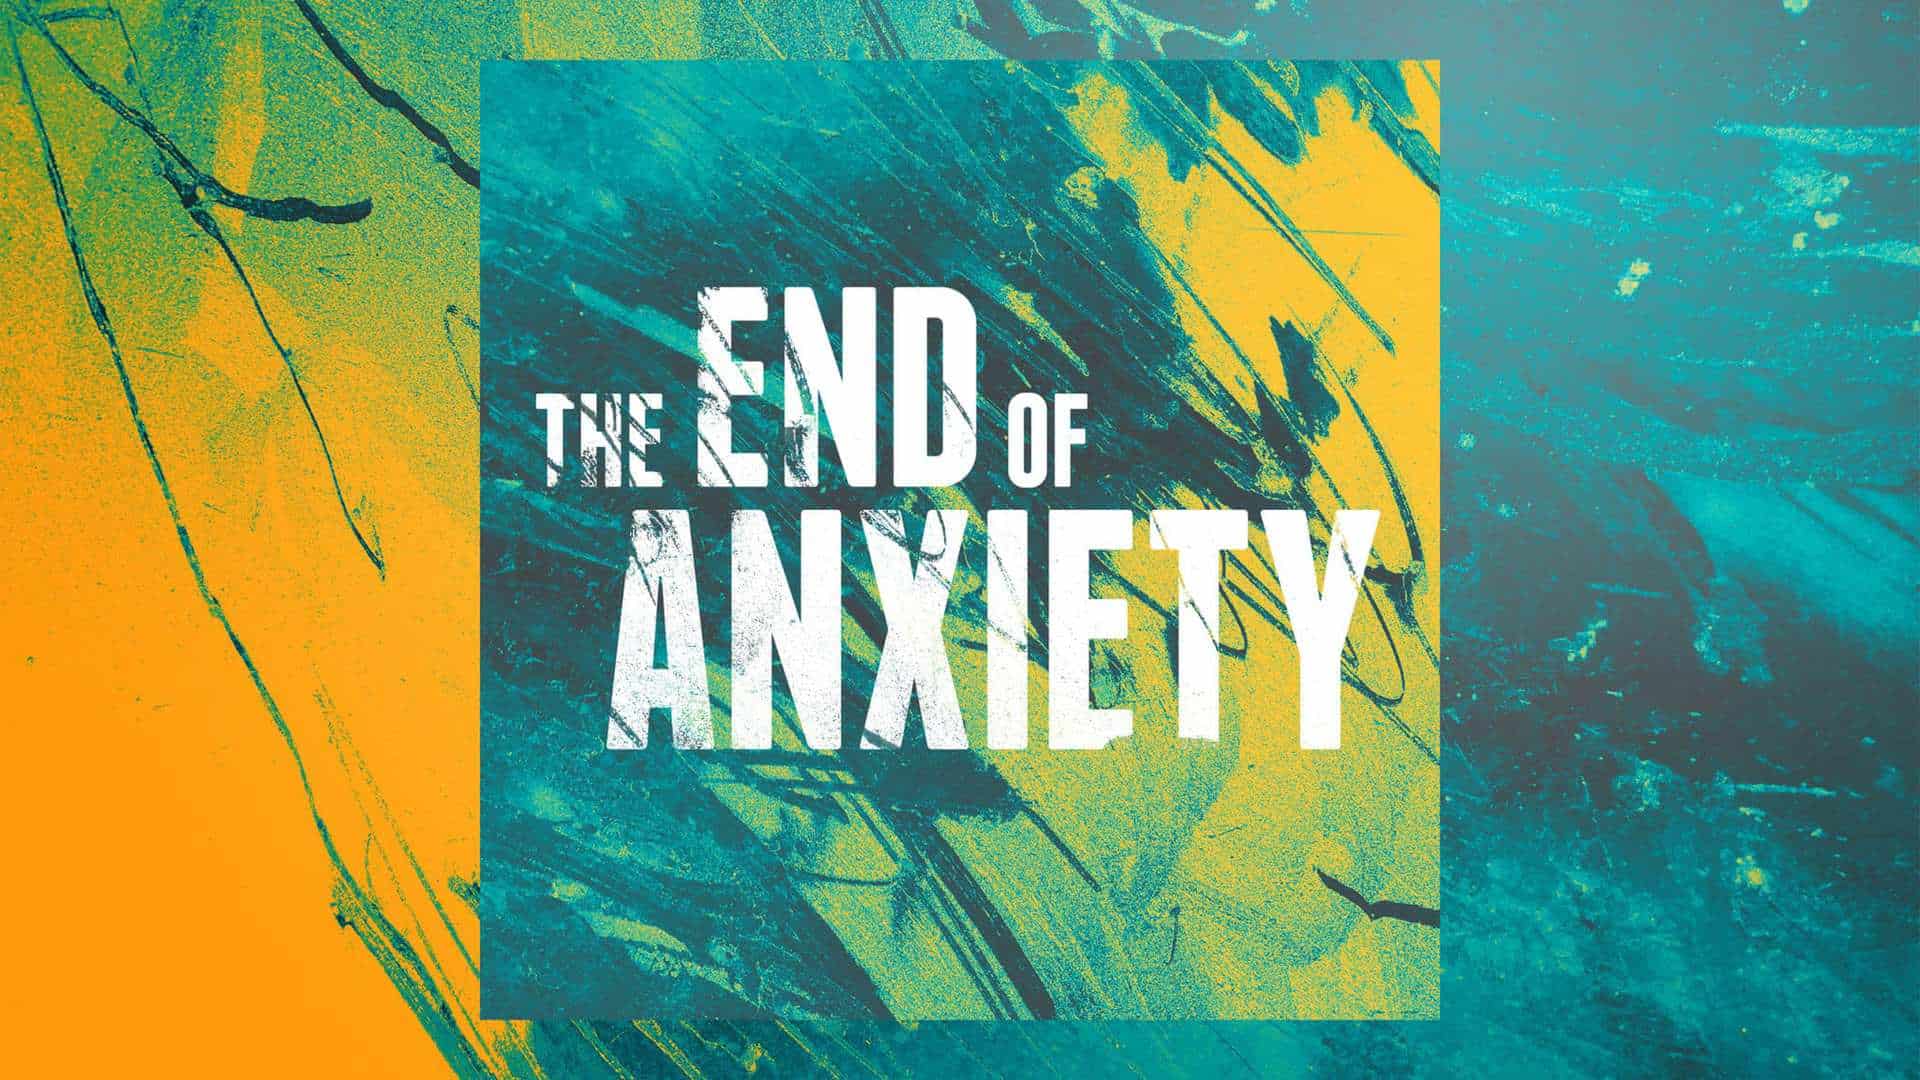 The end of anxiety: How can I gain control when I feel out of control - 7/19/20